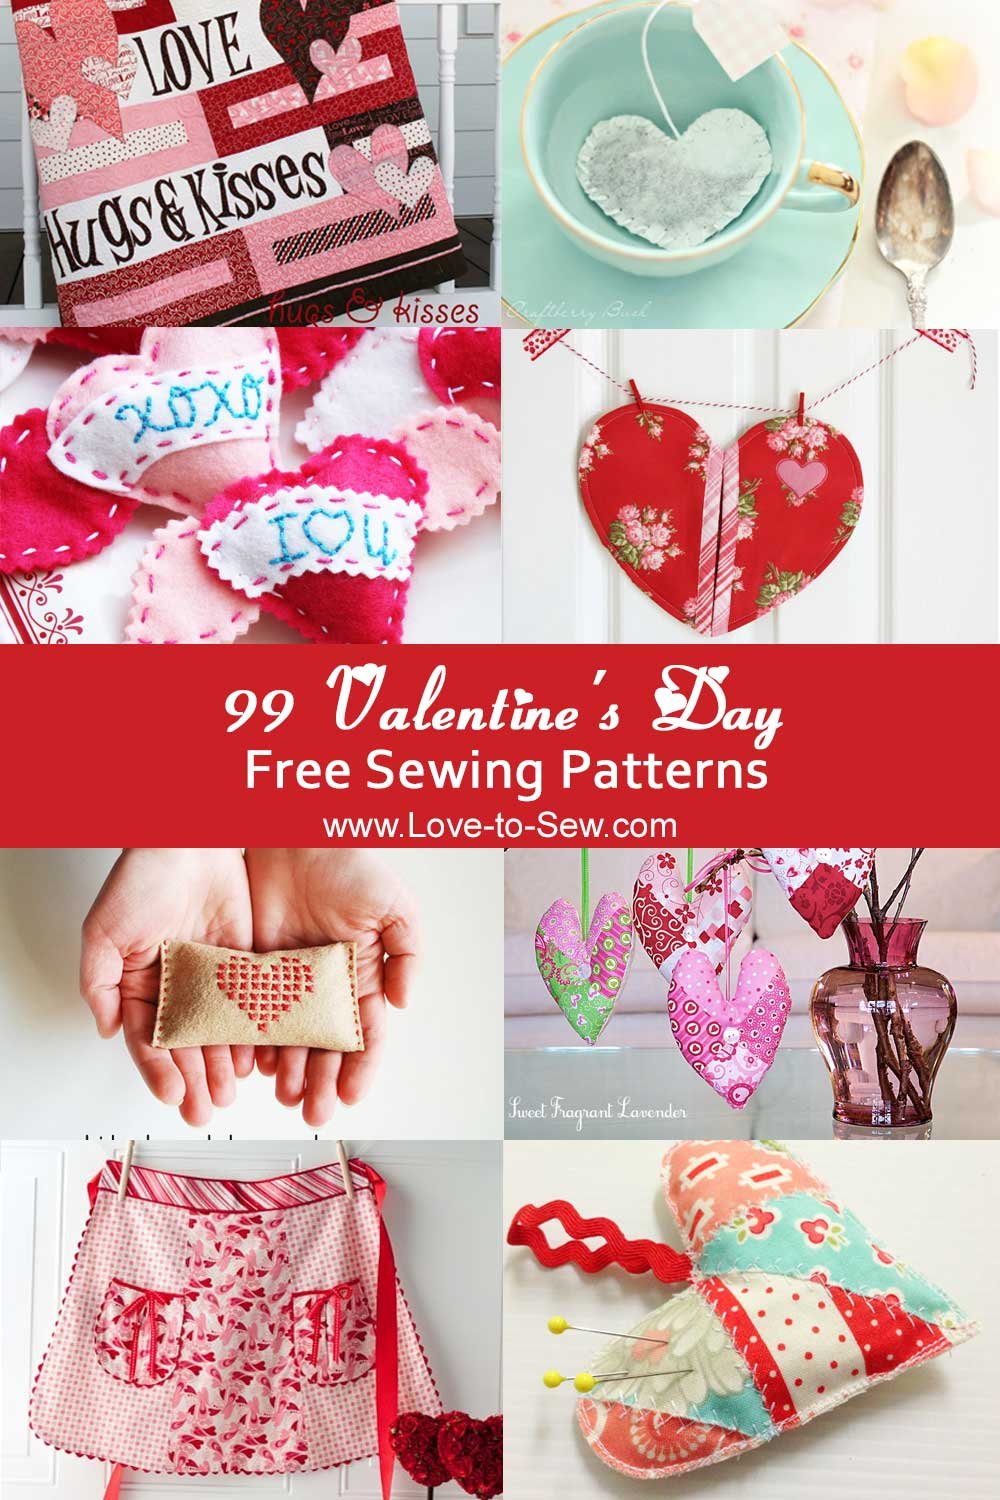 99 Valentine's Day Free Sewing Patterns